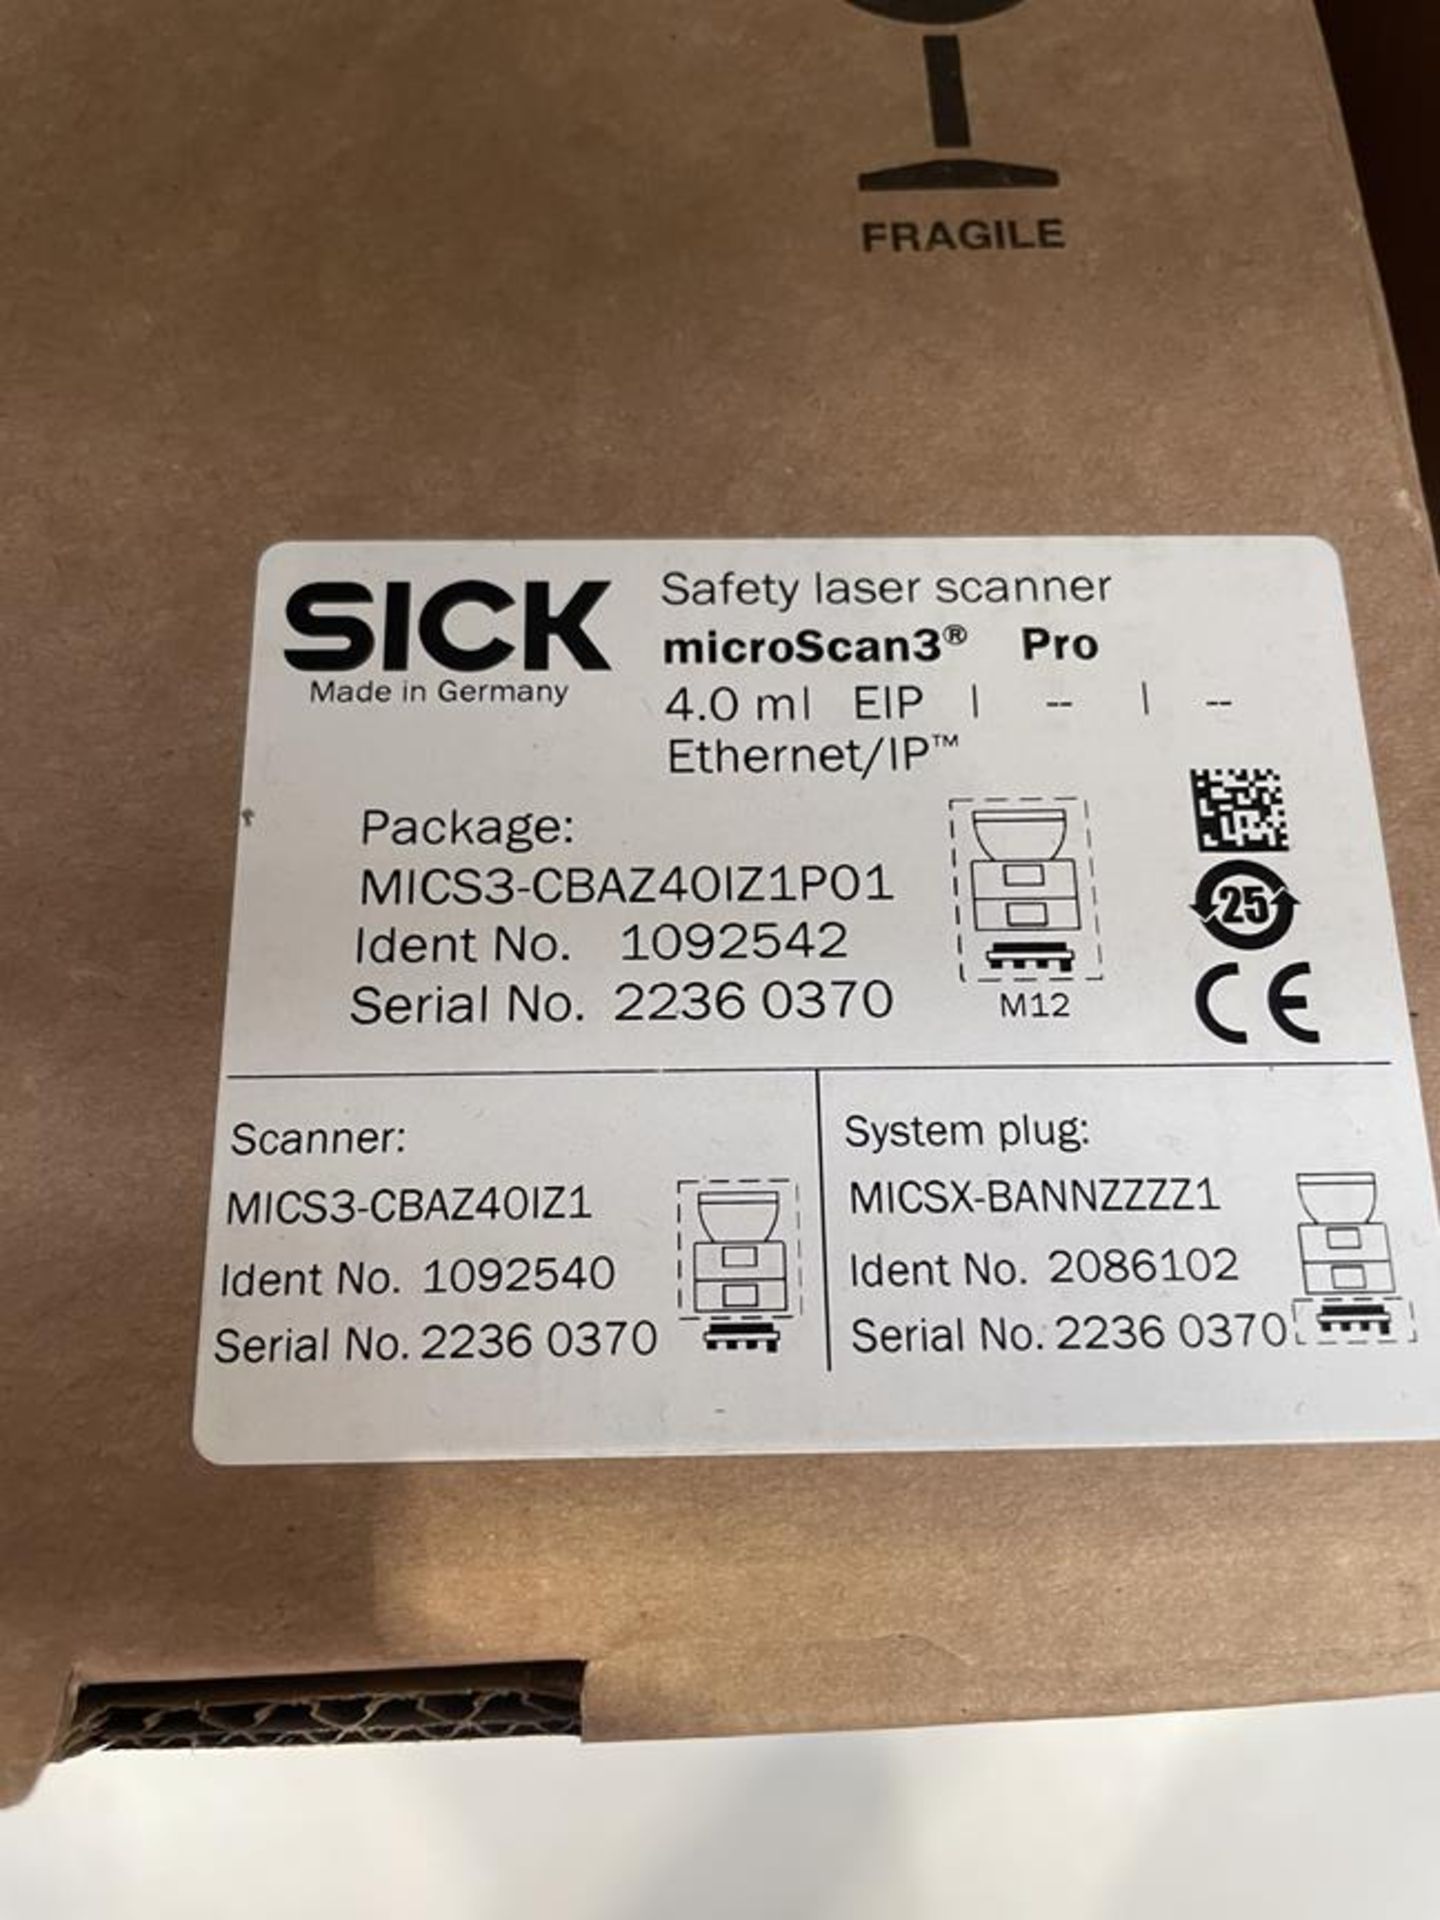 4x (no.) Sick, Microscan 3 Pro safety laser scanner (boxed and unused) - Image 2 of 2